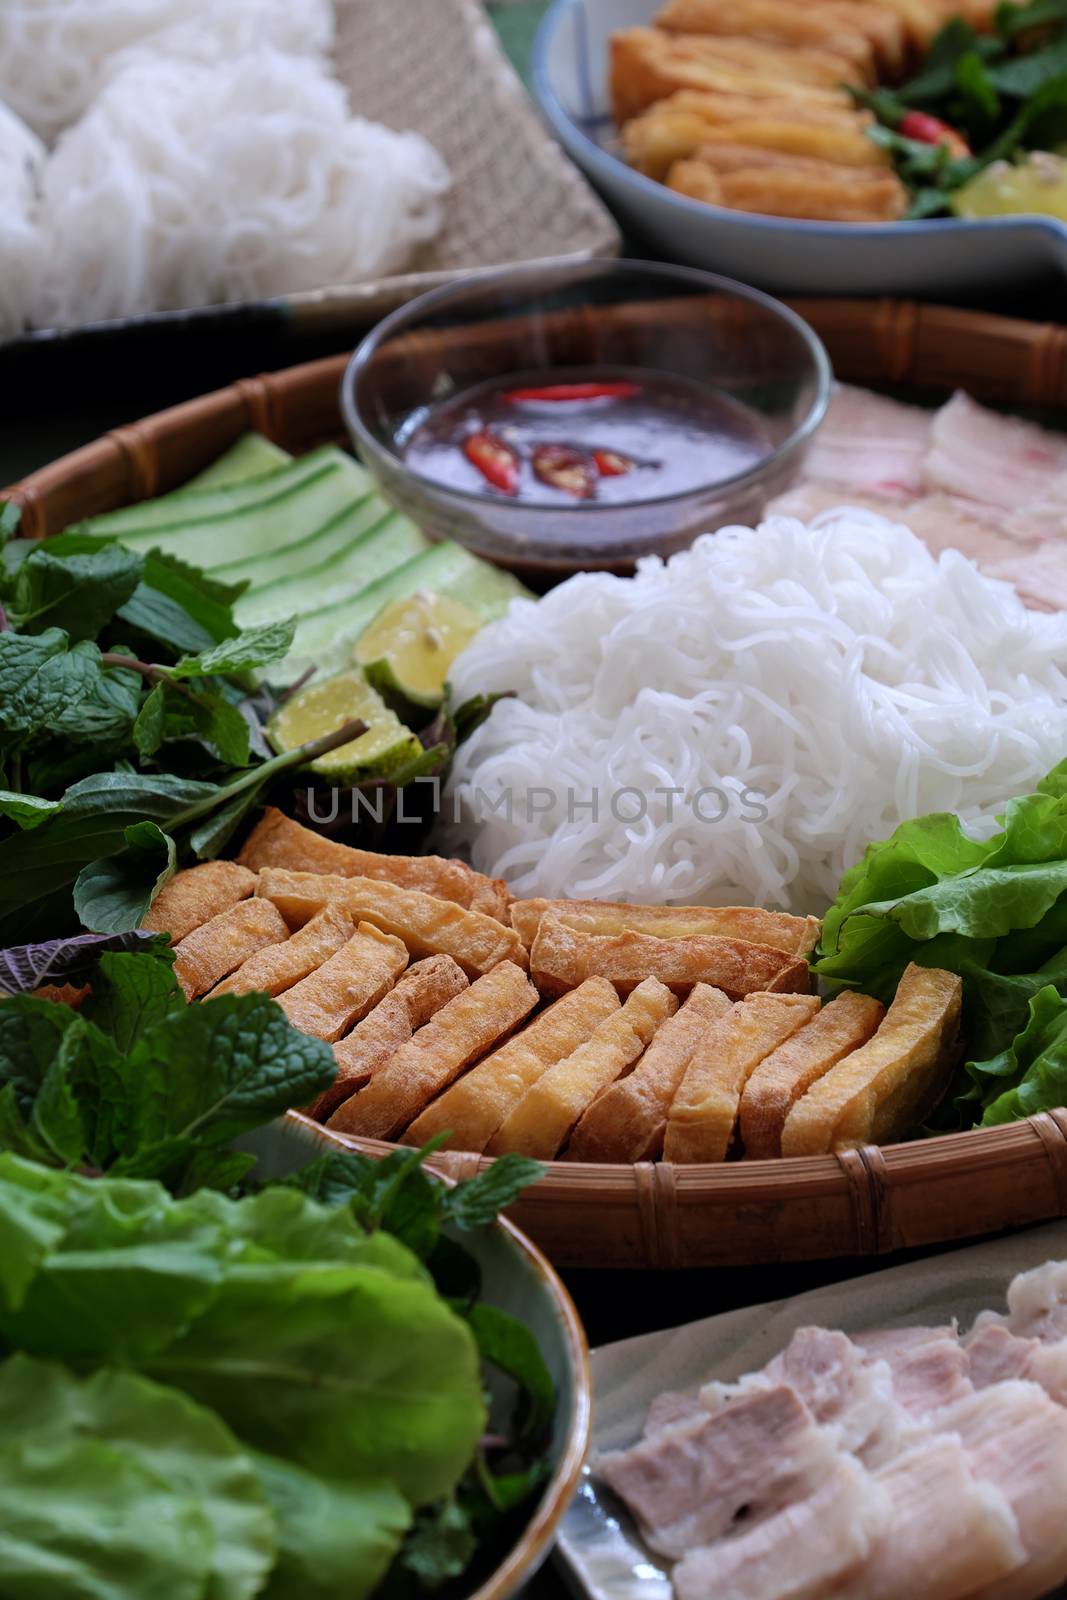 Delicious Vietnamese food, bun dau mam tom, is popular street food make from vermicelli with boiled meat, fried tofu, shrimp paste and green vegetables, cucumer and spice as chilli, lemon 